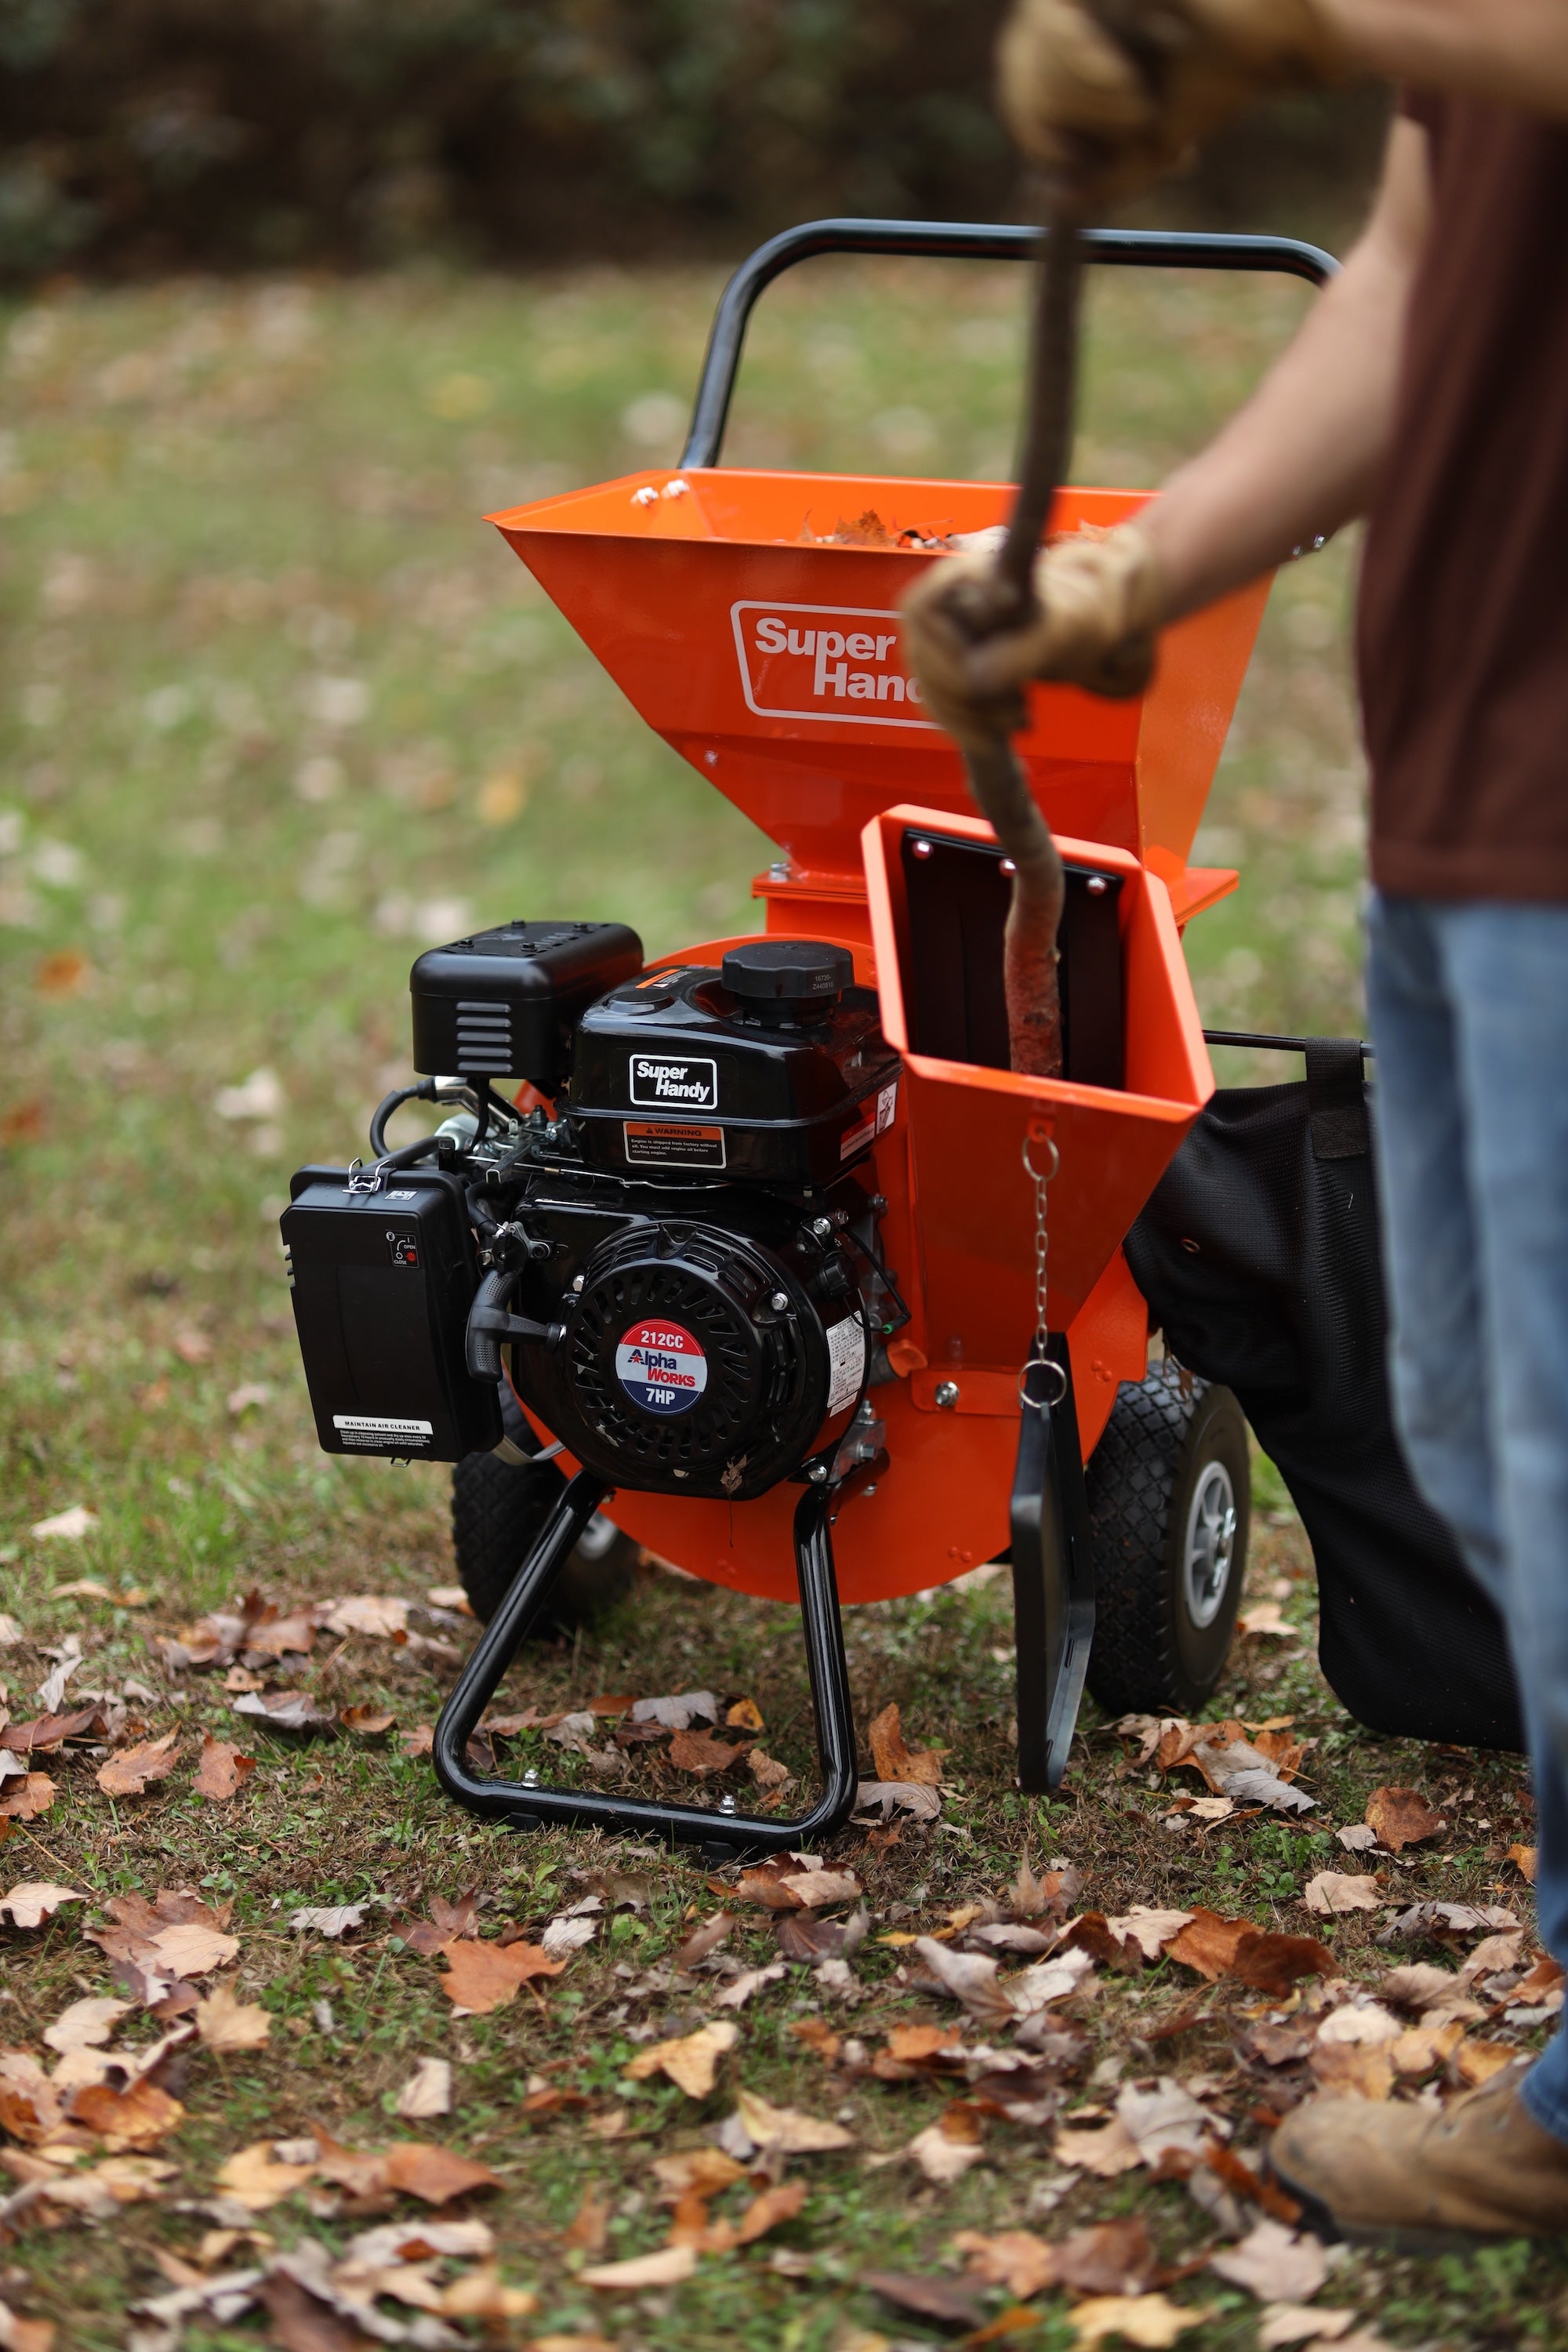 Buyers Guide: Wood Chippers - "Choosing the Perfect SuperHandy Model for Your Yardwork Needs"